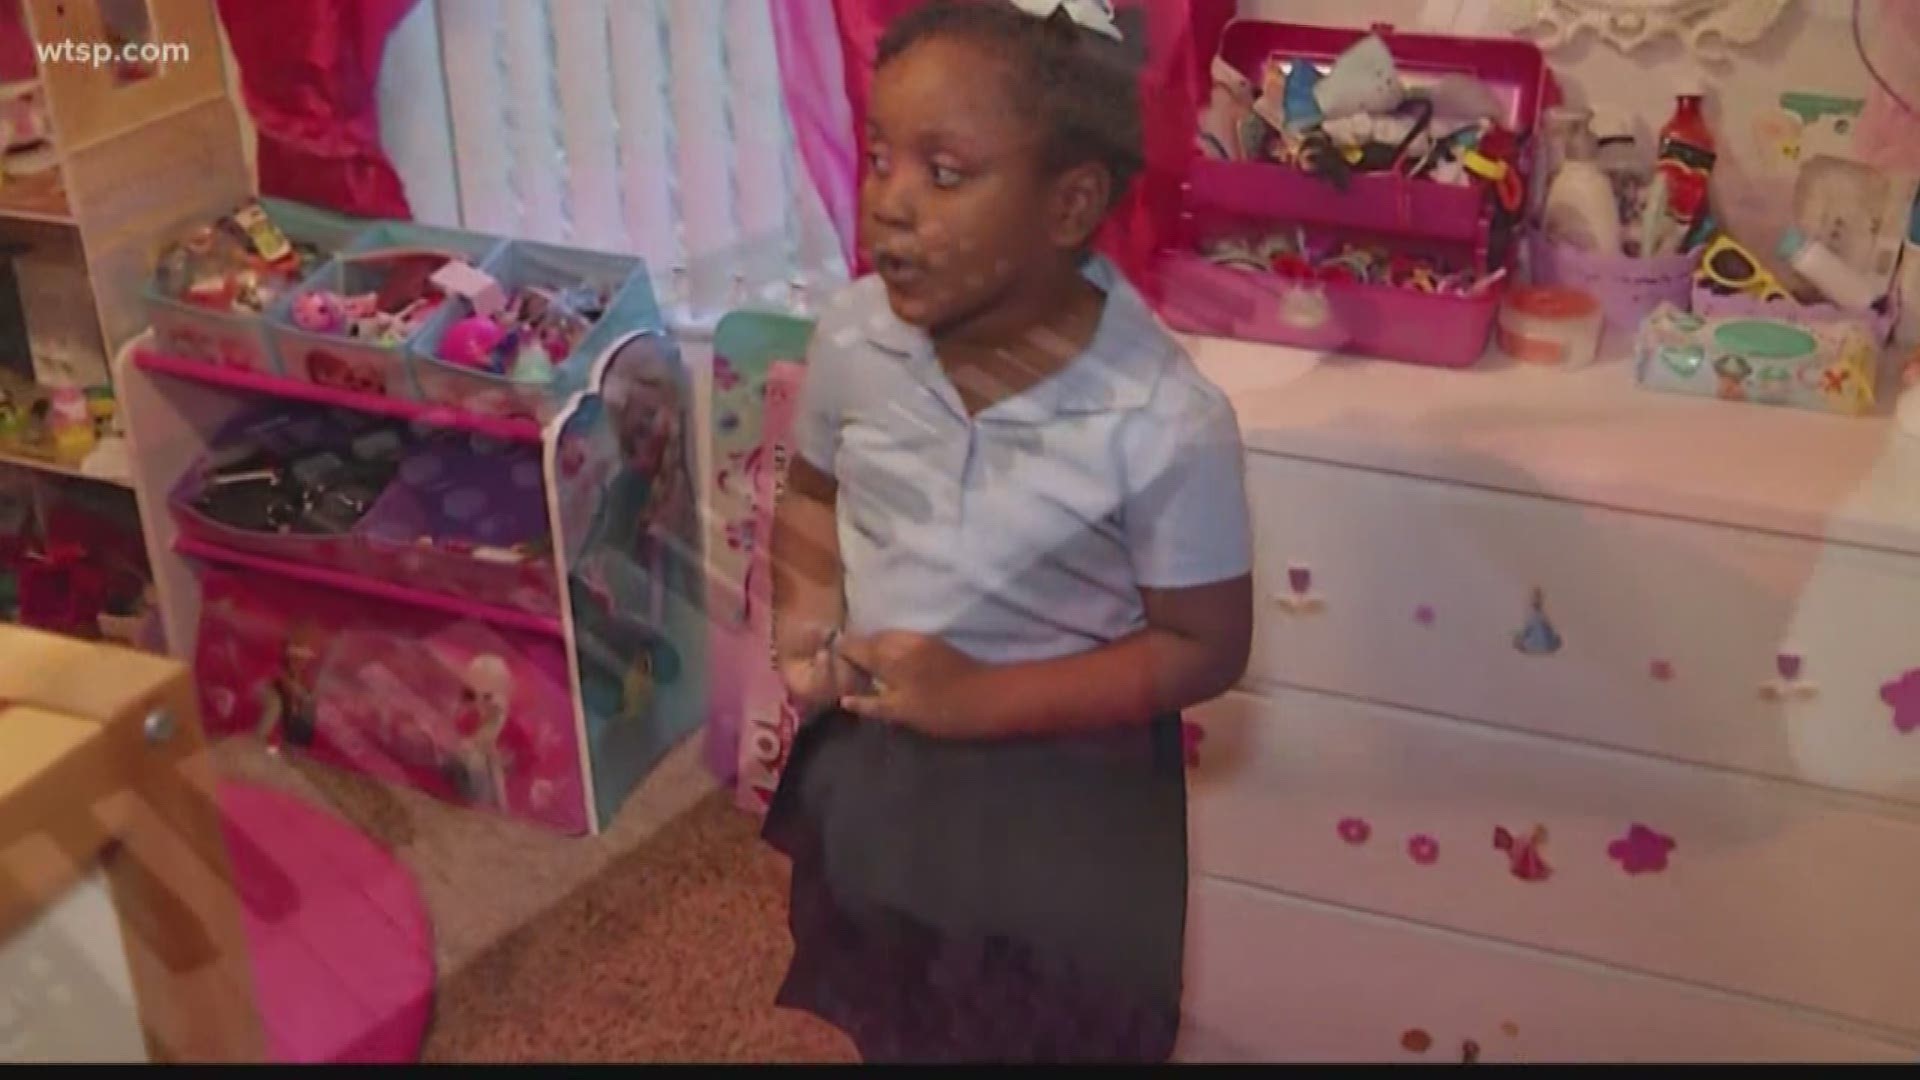 Her grandmother says 6-year-old Kaia Rolle was acting out in class due to a side effect of a lack of sleep from a medical condition.